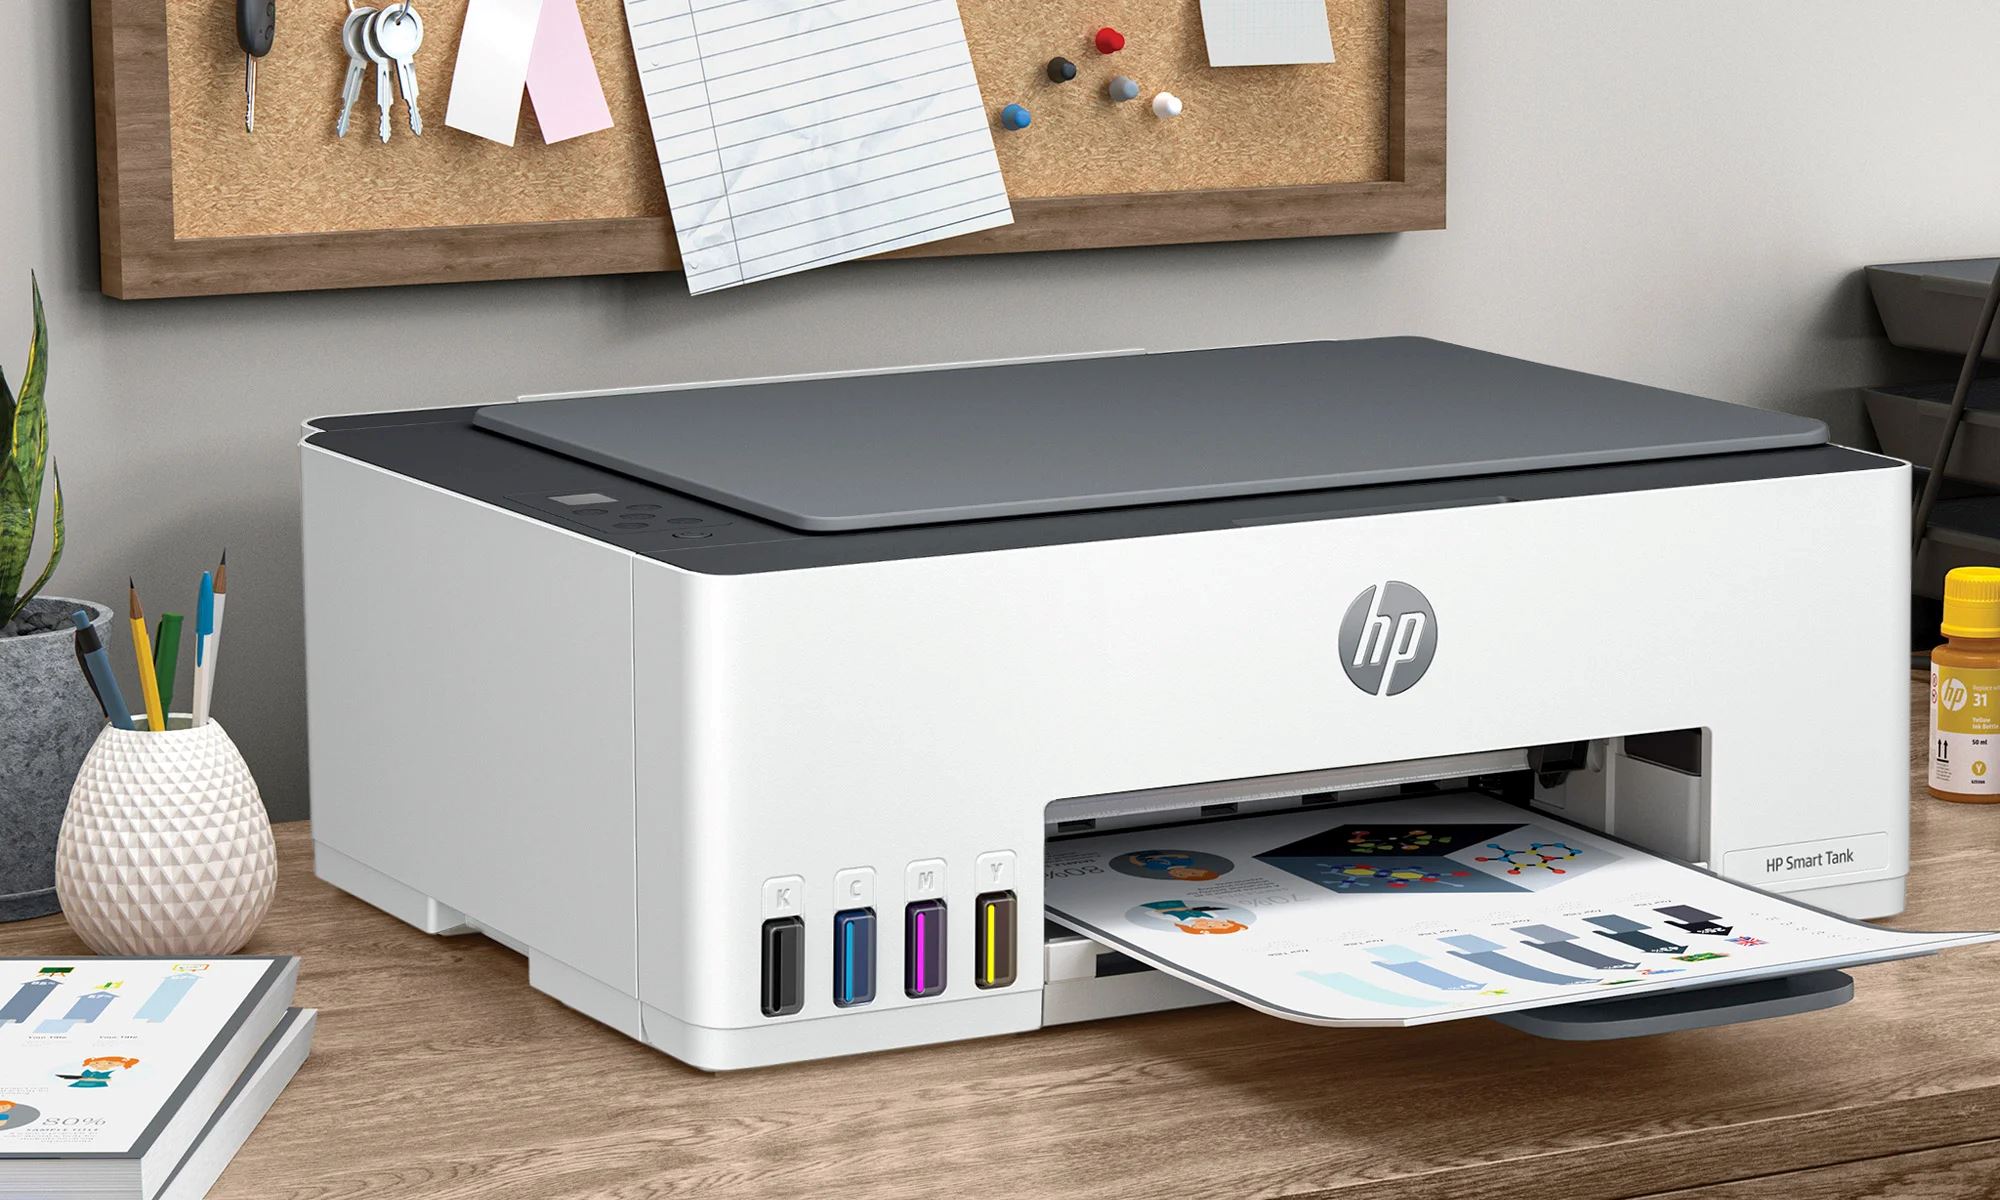 How To Change The Wi-Fi On My HP Printer